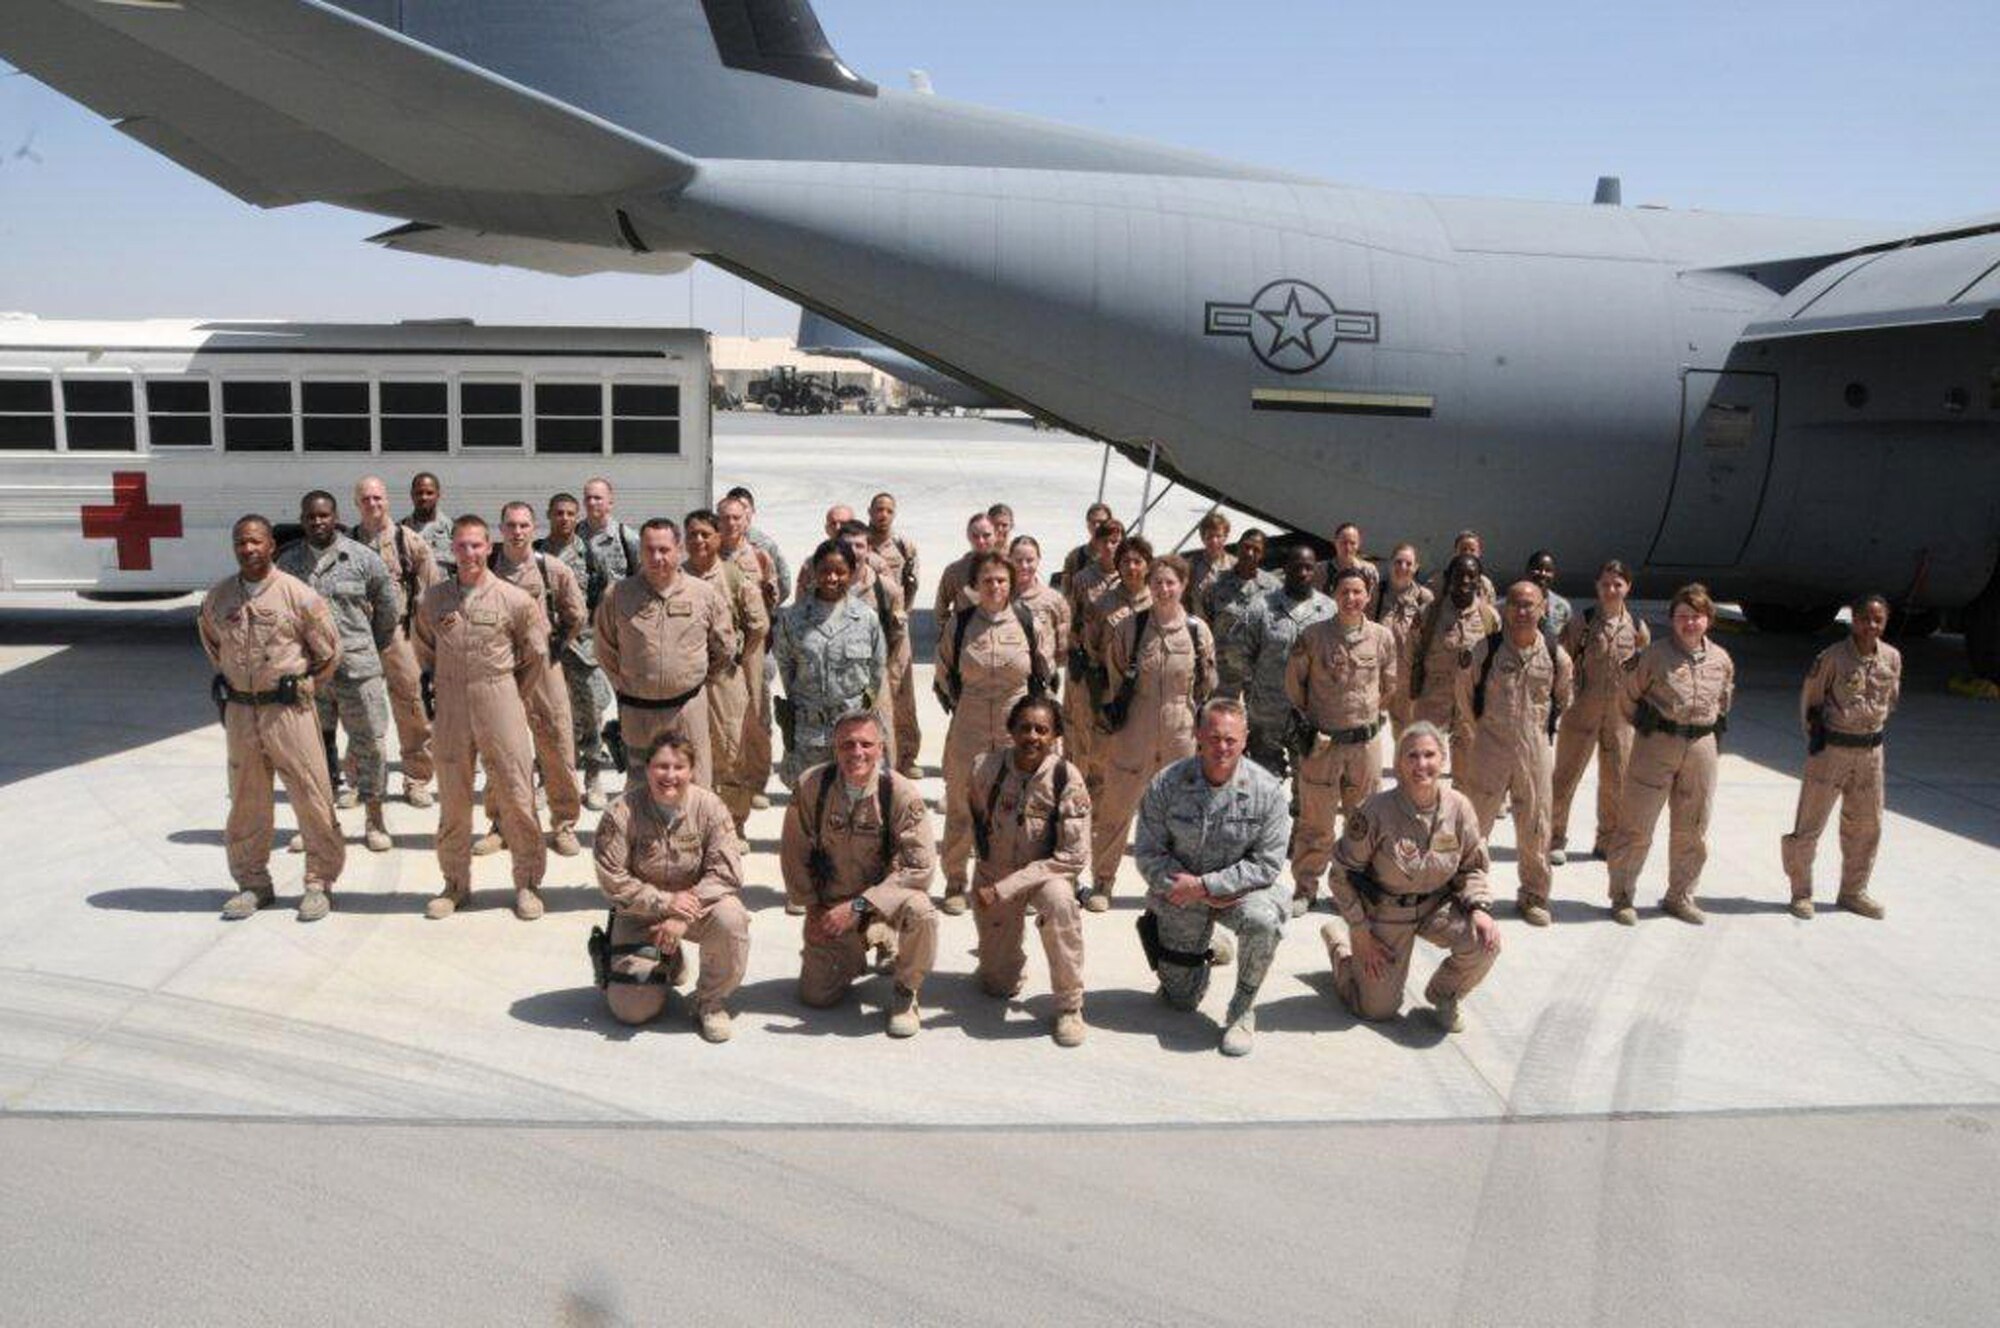 Memebers of the 651st Expeditionary Aeromedical Evacuation Squadron, Kandahar Airfield, Afghanistan, in front of their medical bus and C-130 Hercules aircraft, April 6, 2012. Maj. Peter Jorgensen, out of the 446th Aeromedical Evacuation Squadron, McChord Field, Wash., is deployed as the 651st EAES director of operations and is responsible for overseeing the daily duties of more than 100 people, who support around-the-clock aeromedical evacuations for more than 100,000 NATO troops. (U.S. Air Force photo/Staff Sgt. Heather Skinkle)